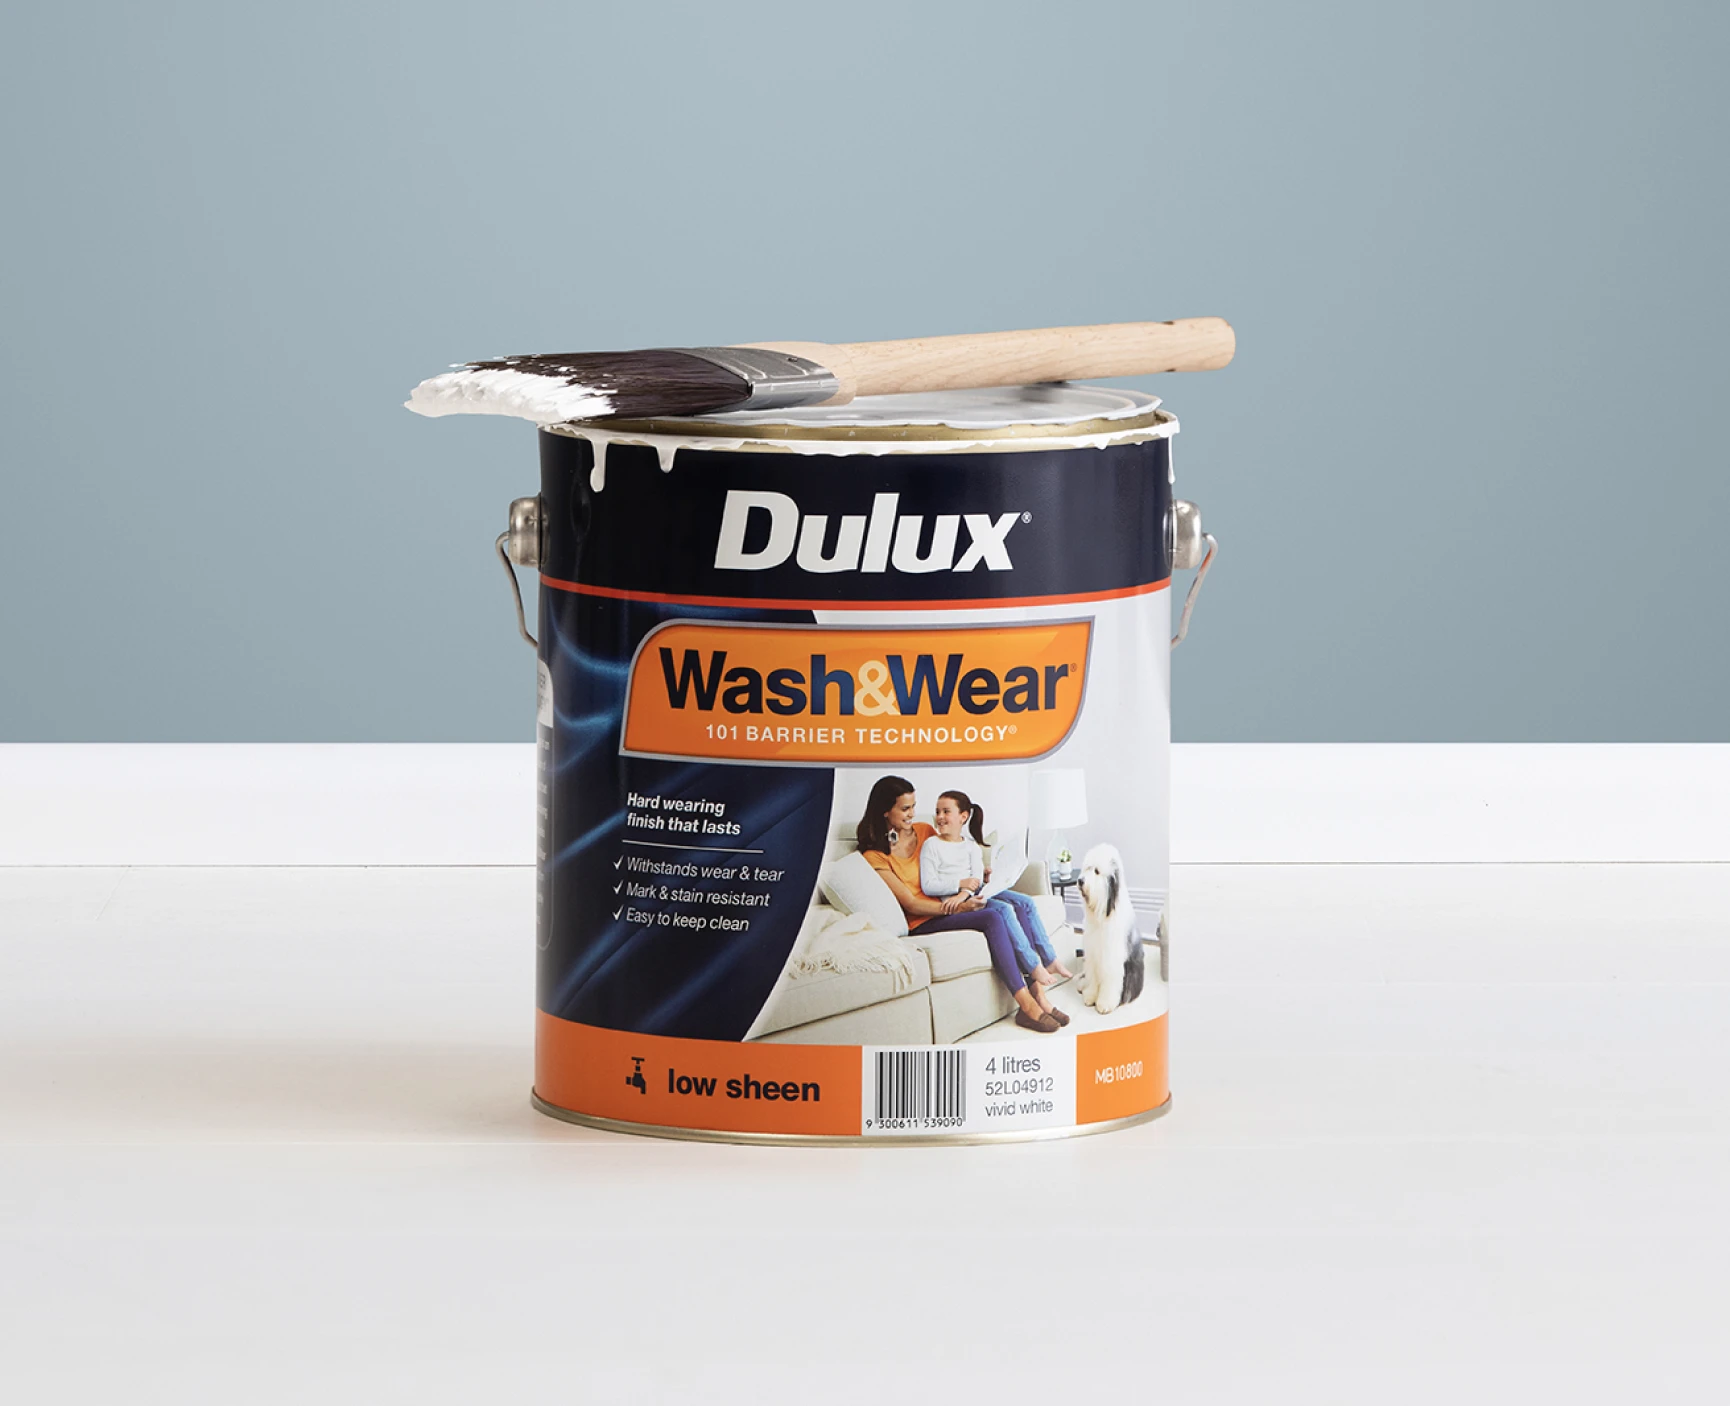 Dulux Wash&Wear tin with a paint brush on top in front of a painted interior wall.